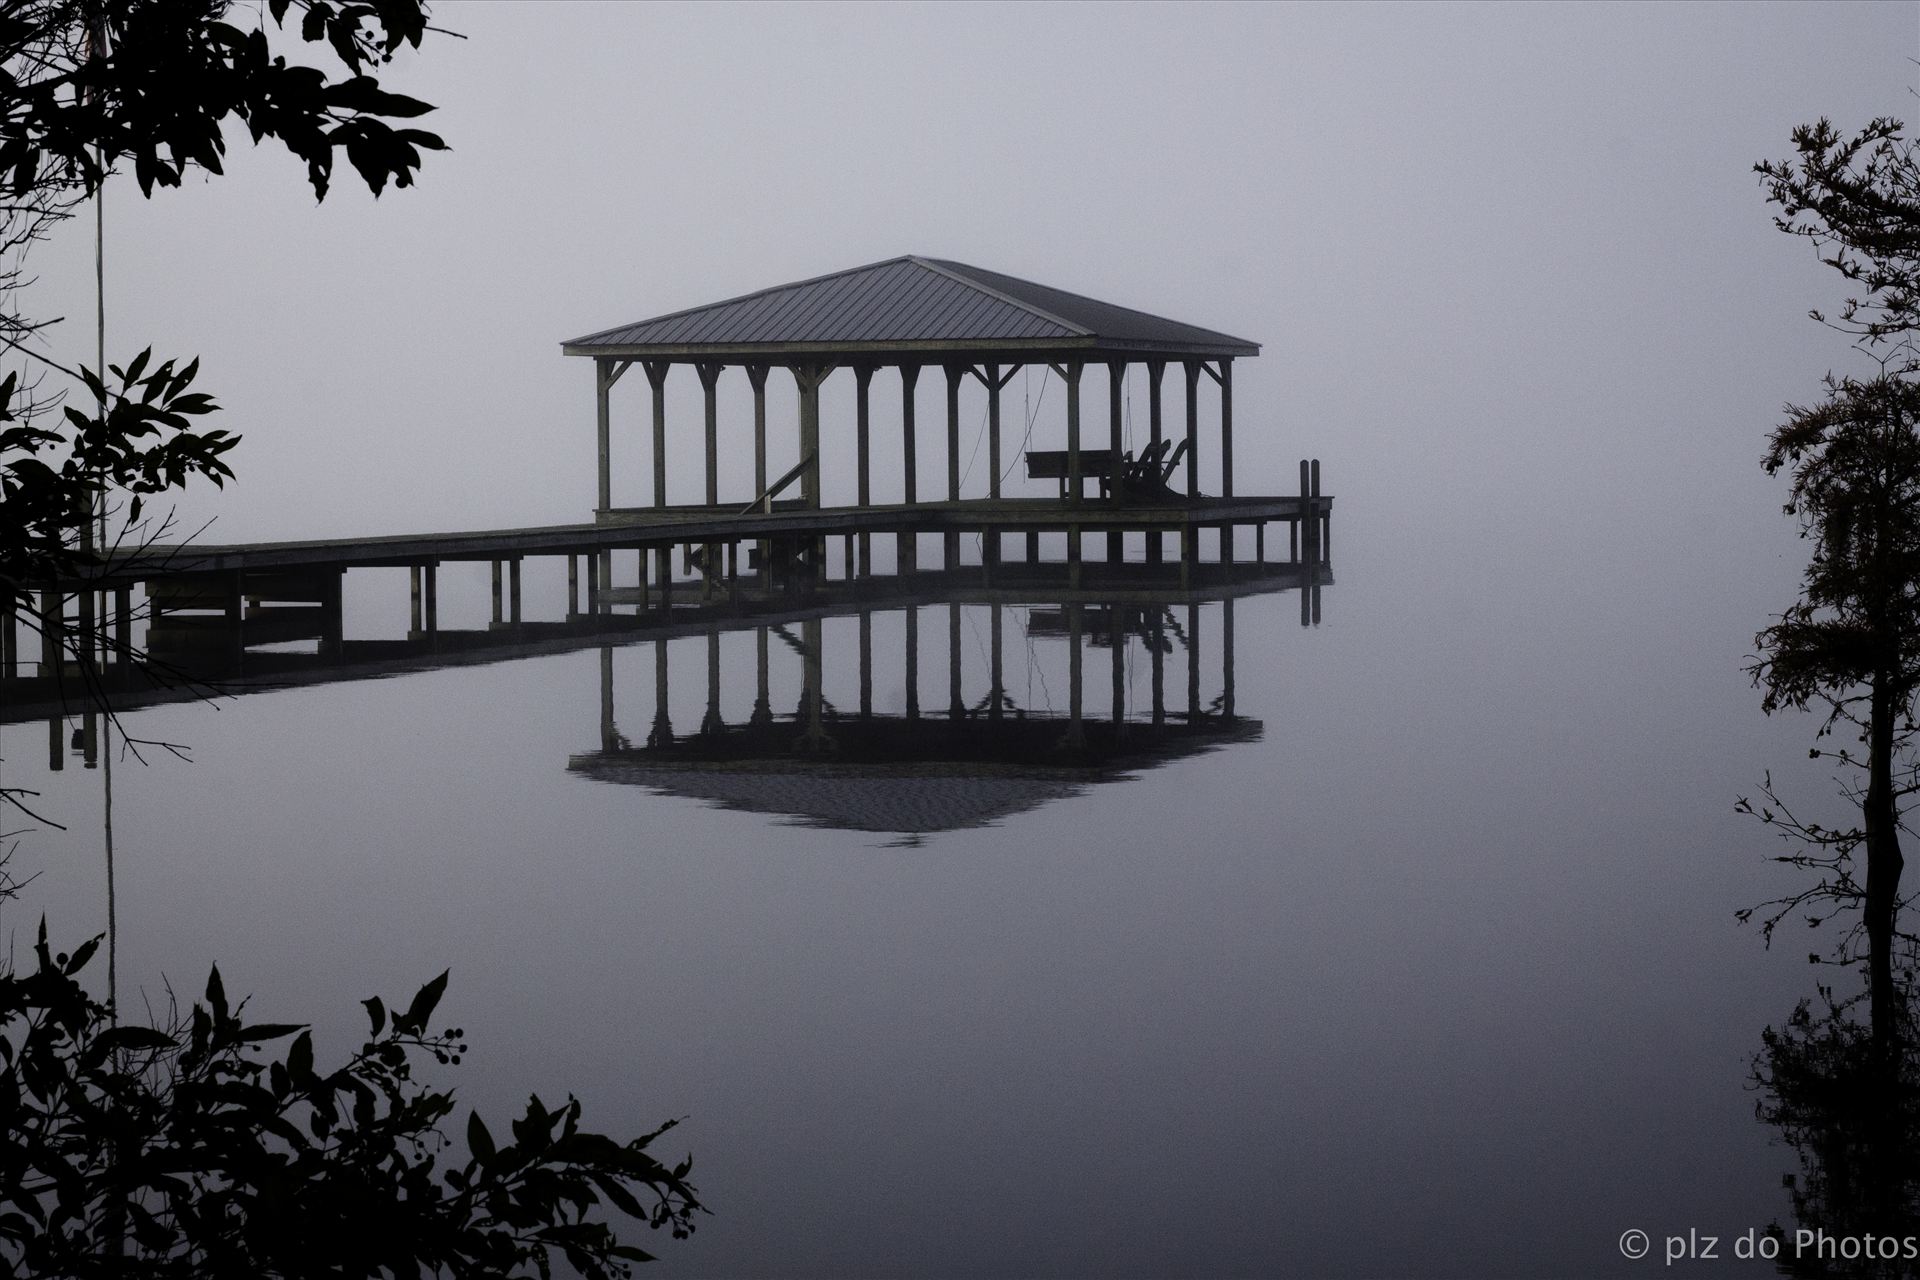 One Foggy Morning - This image was taken at Lake Waccamaw, NC from my mother's yard one fall morning.  I hoped to capture the peacefulness and beauty that I saw this morning. by Patricia Zyzyk